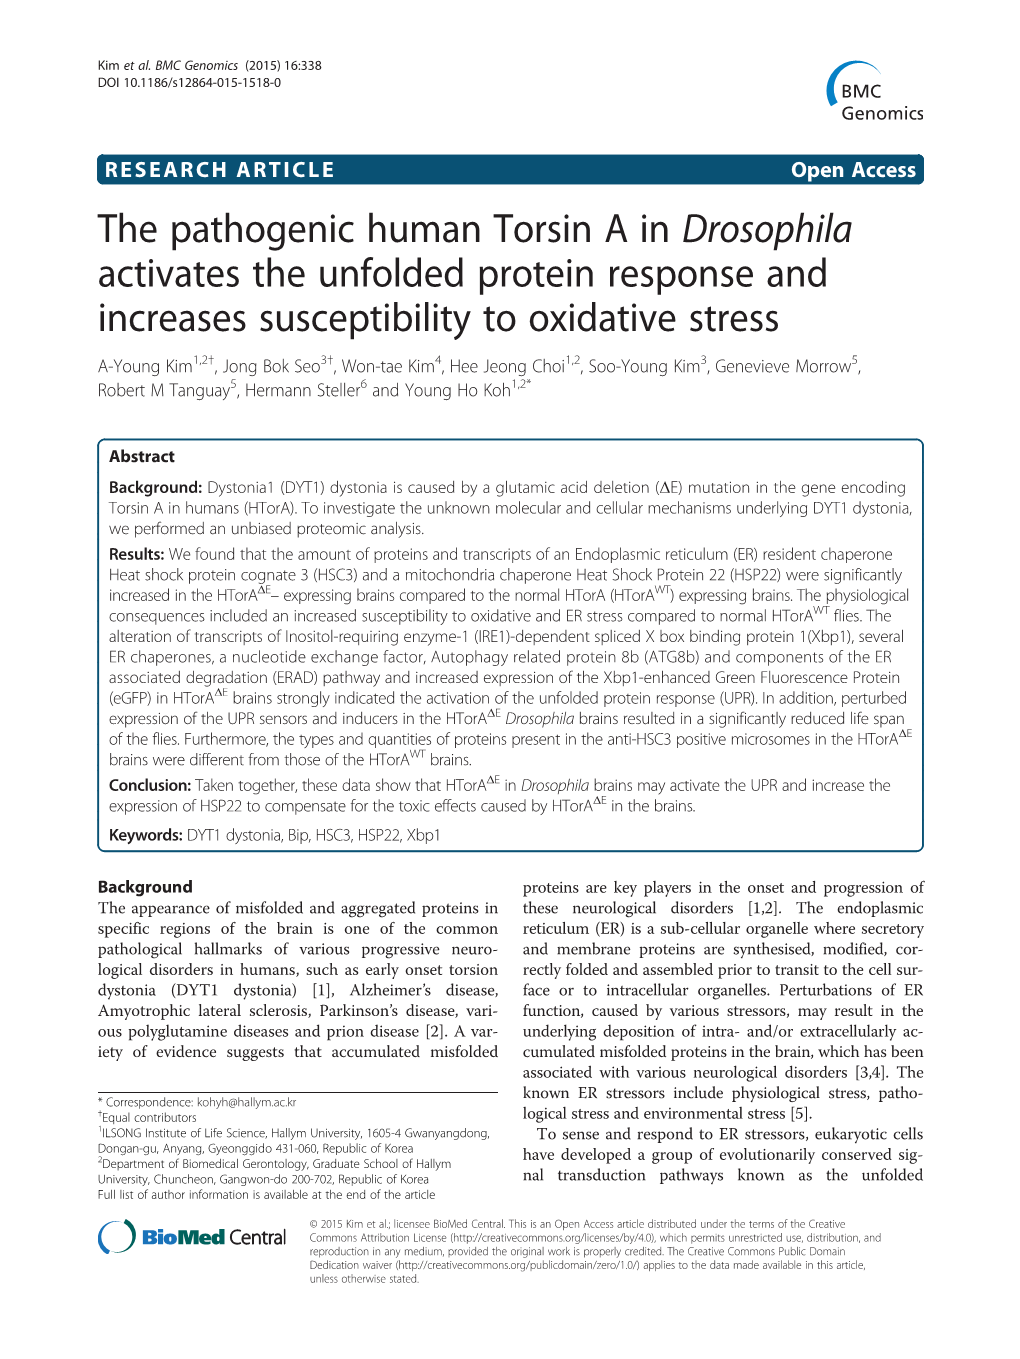 The Pathogenic Human Torsin a in Drosophila Activates the Unfolded